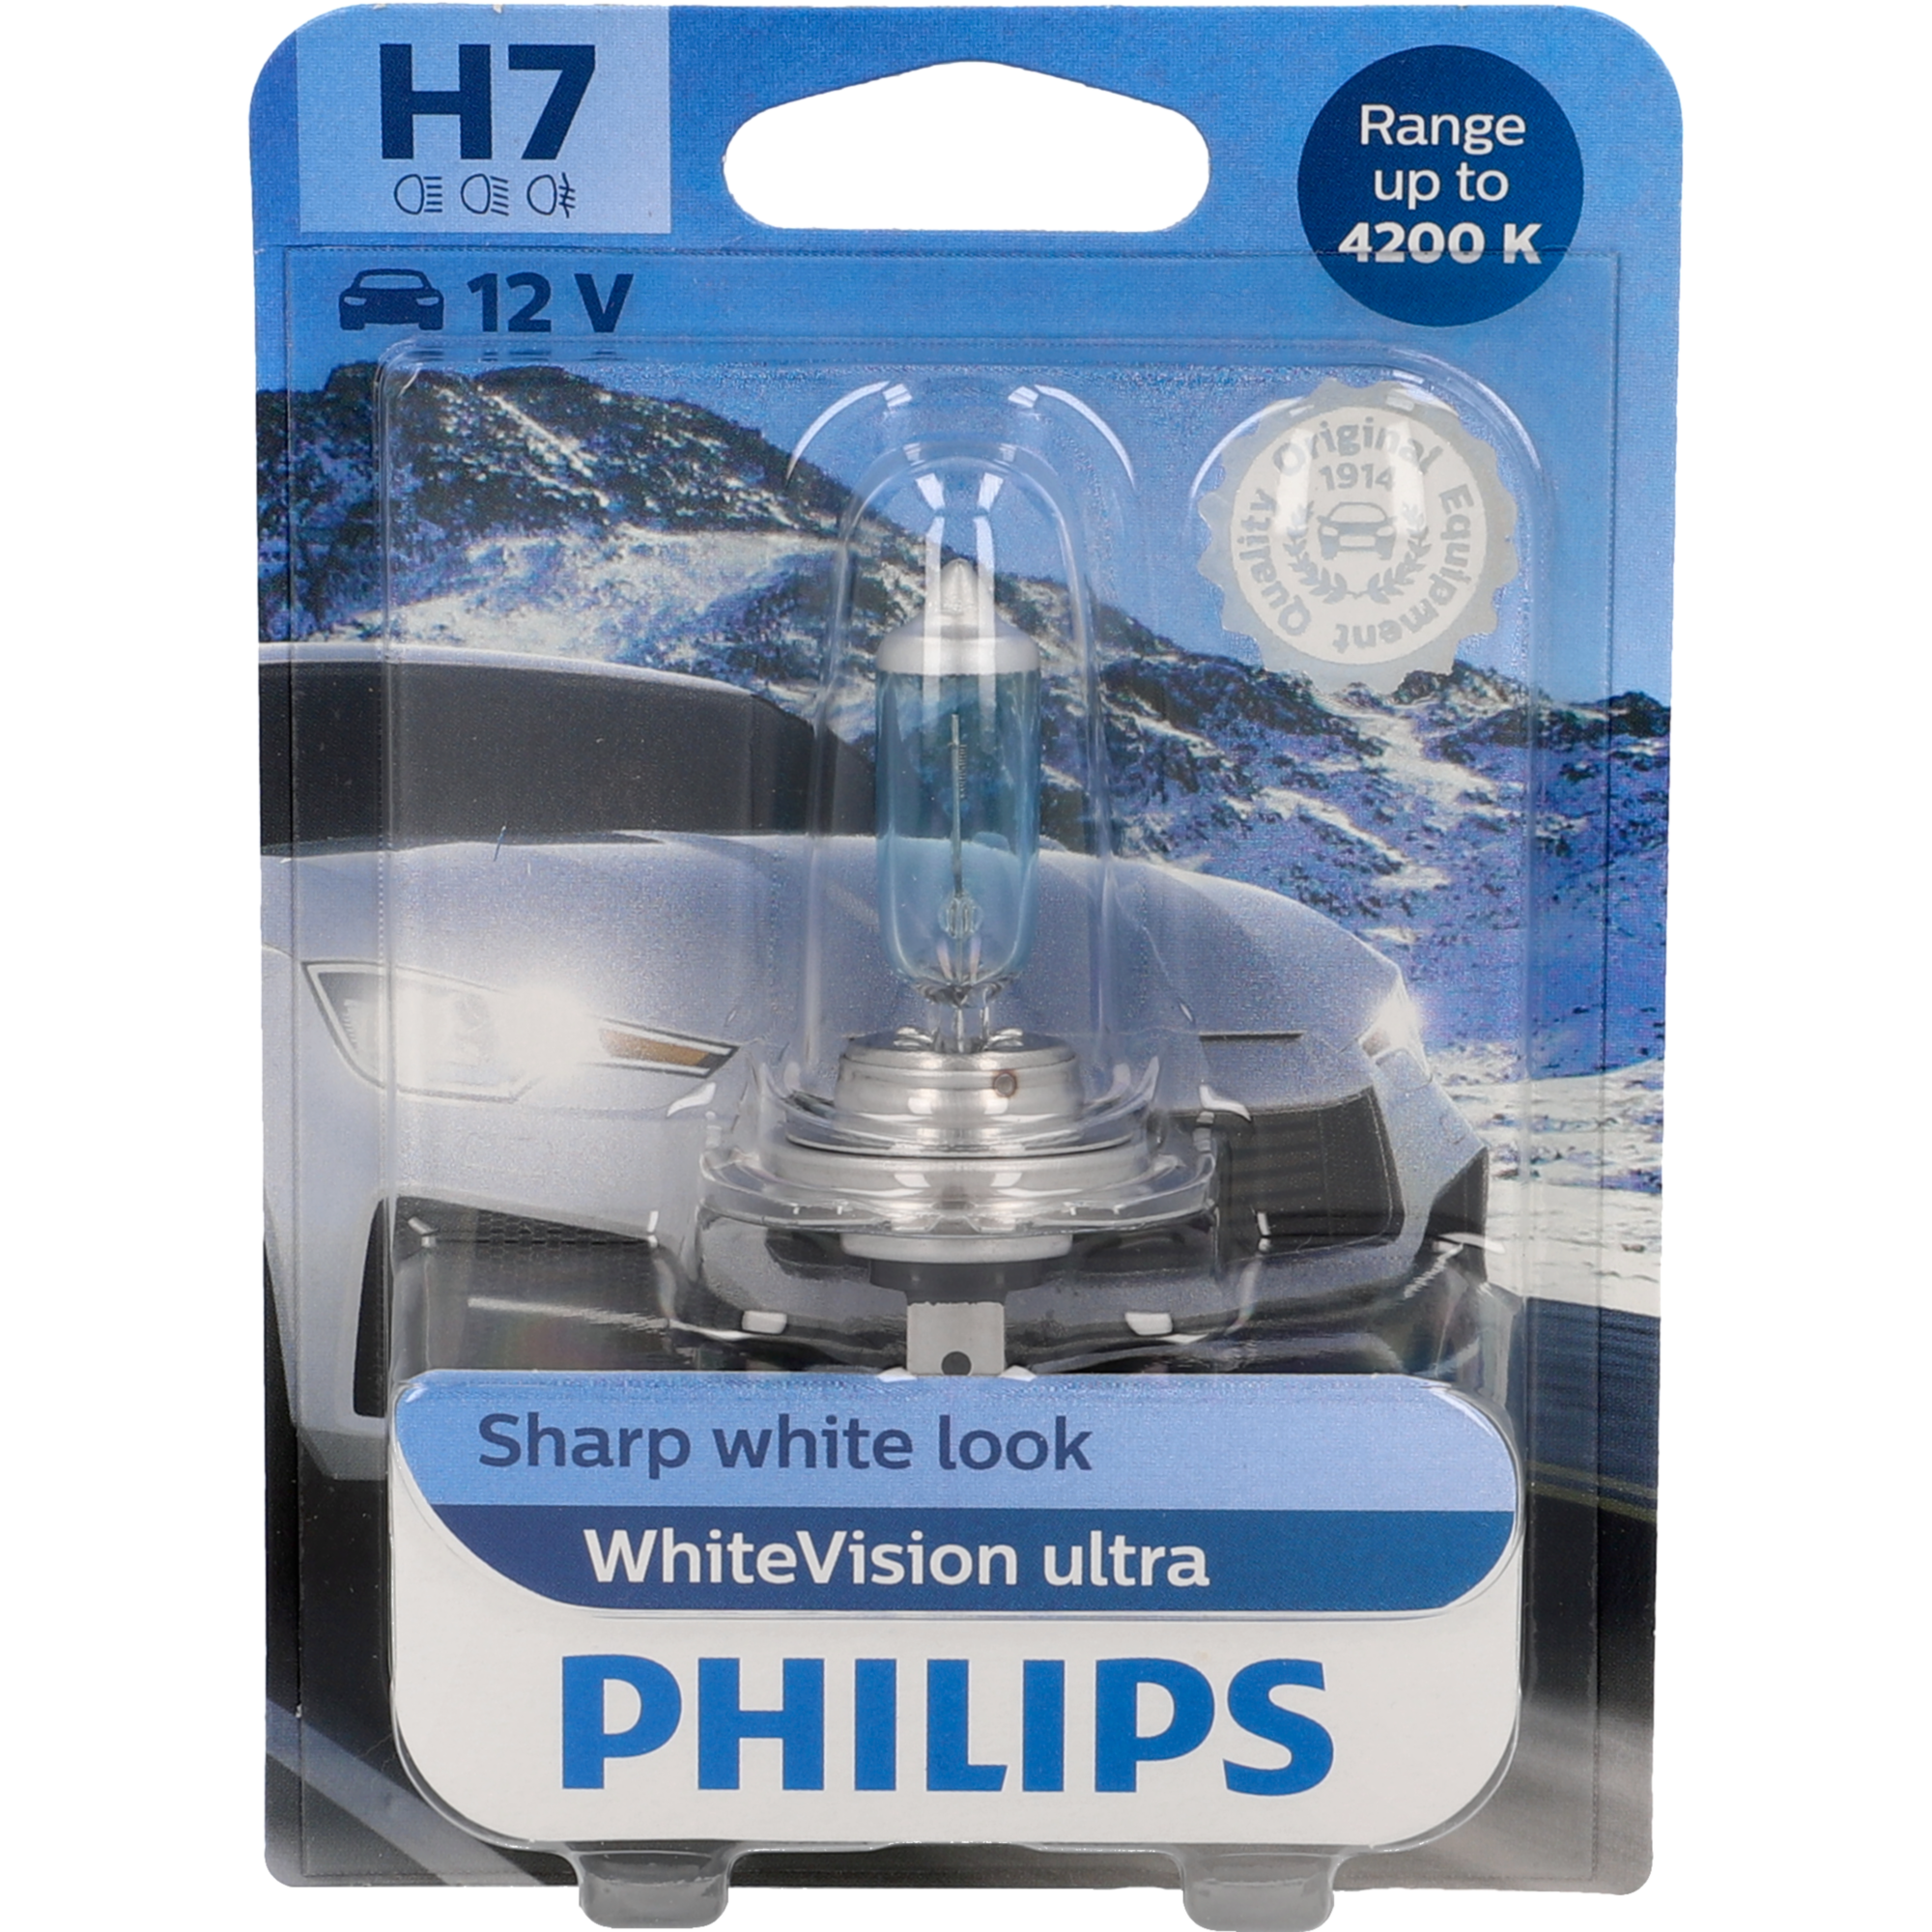 Fahrzeugscheinwerferlampe 'H7 WhiteVision ultra' 55 W 12 V + product picture